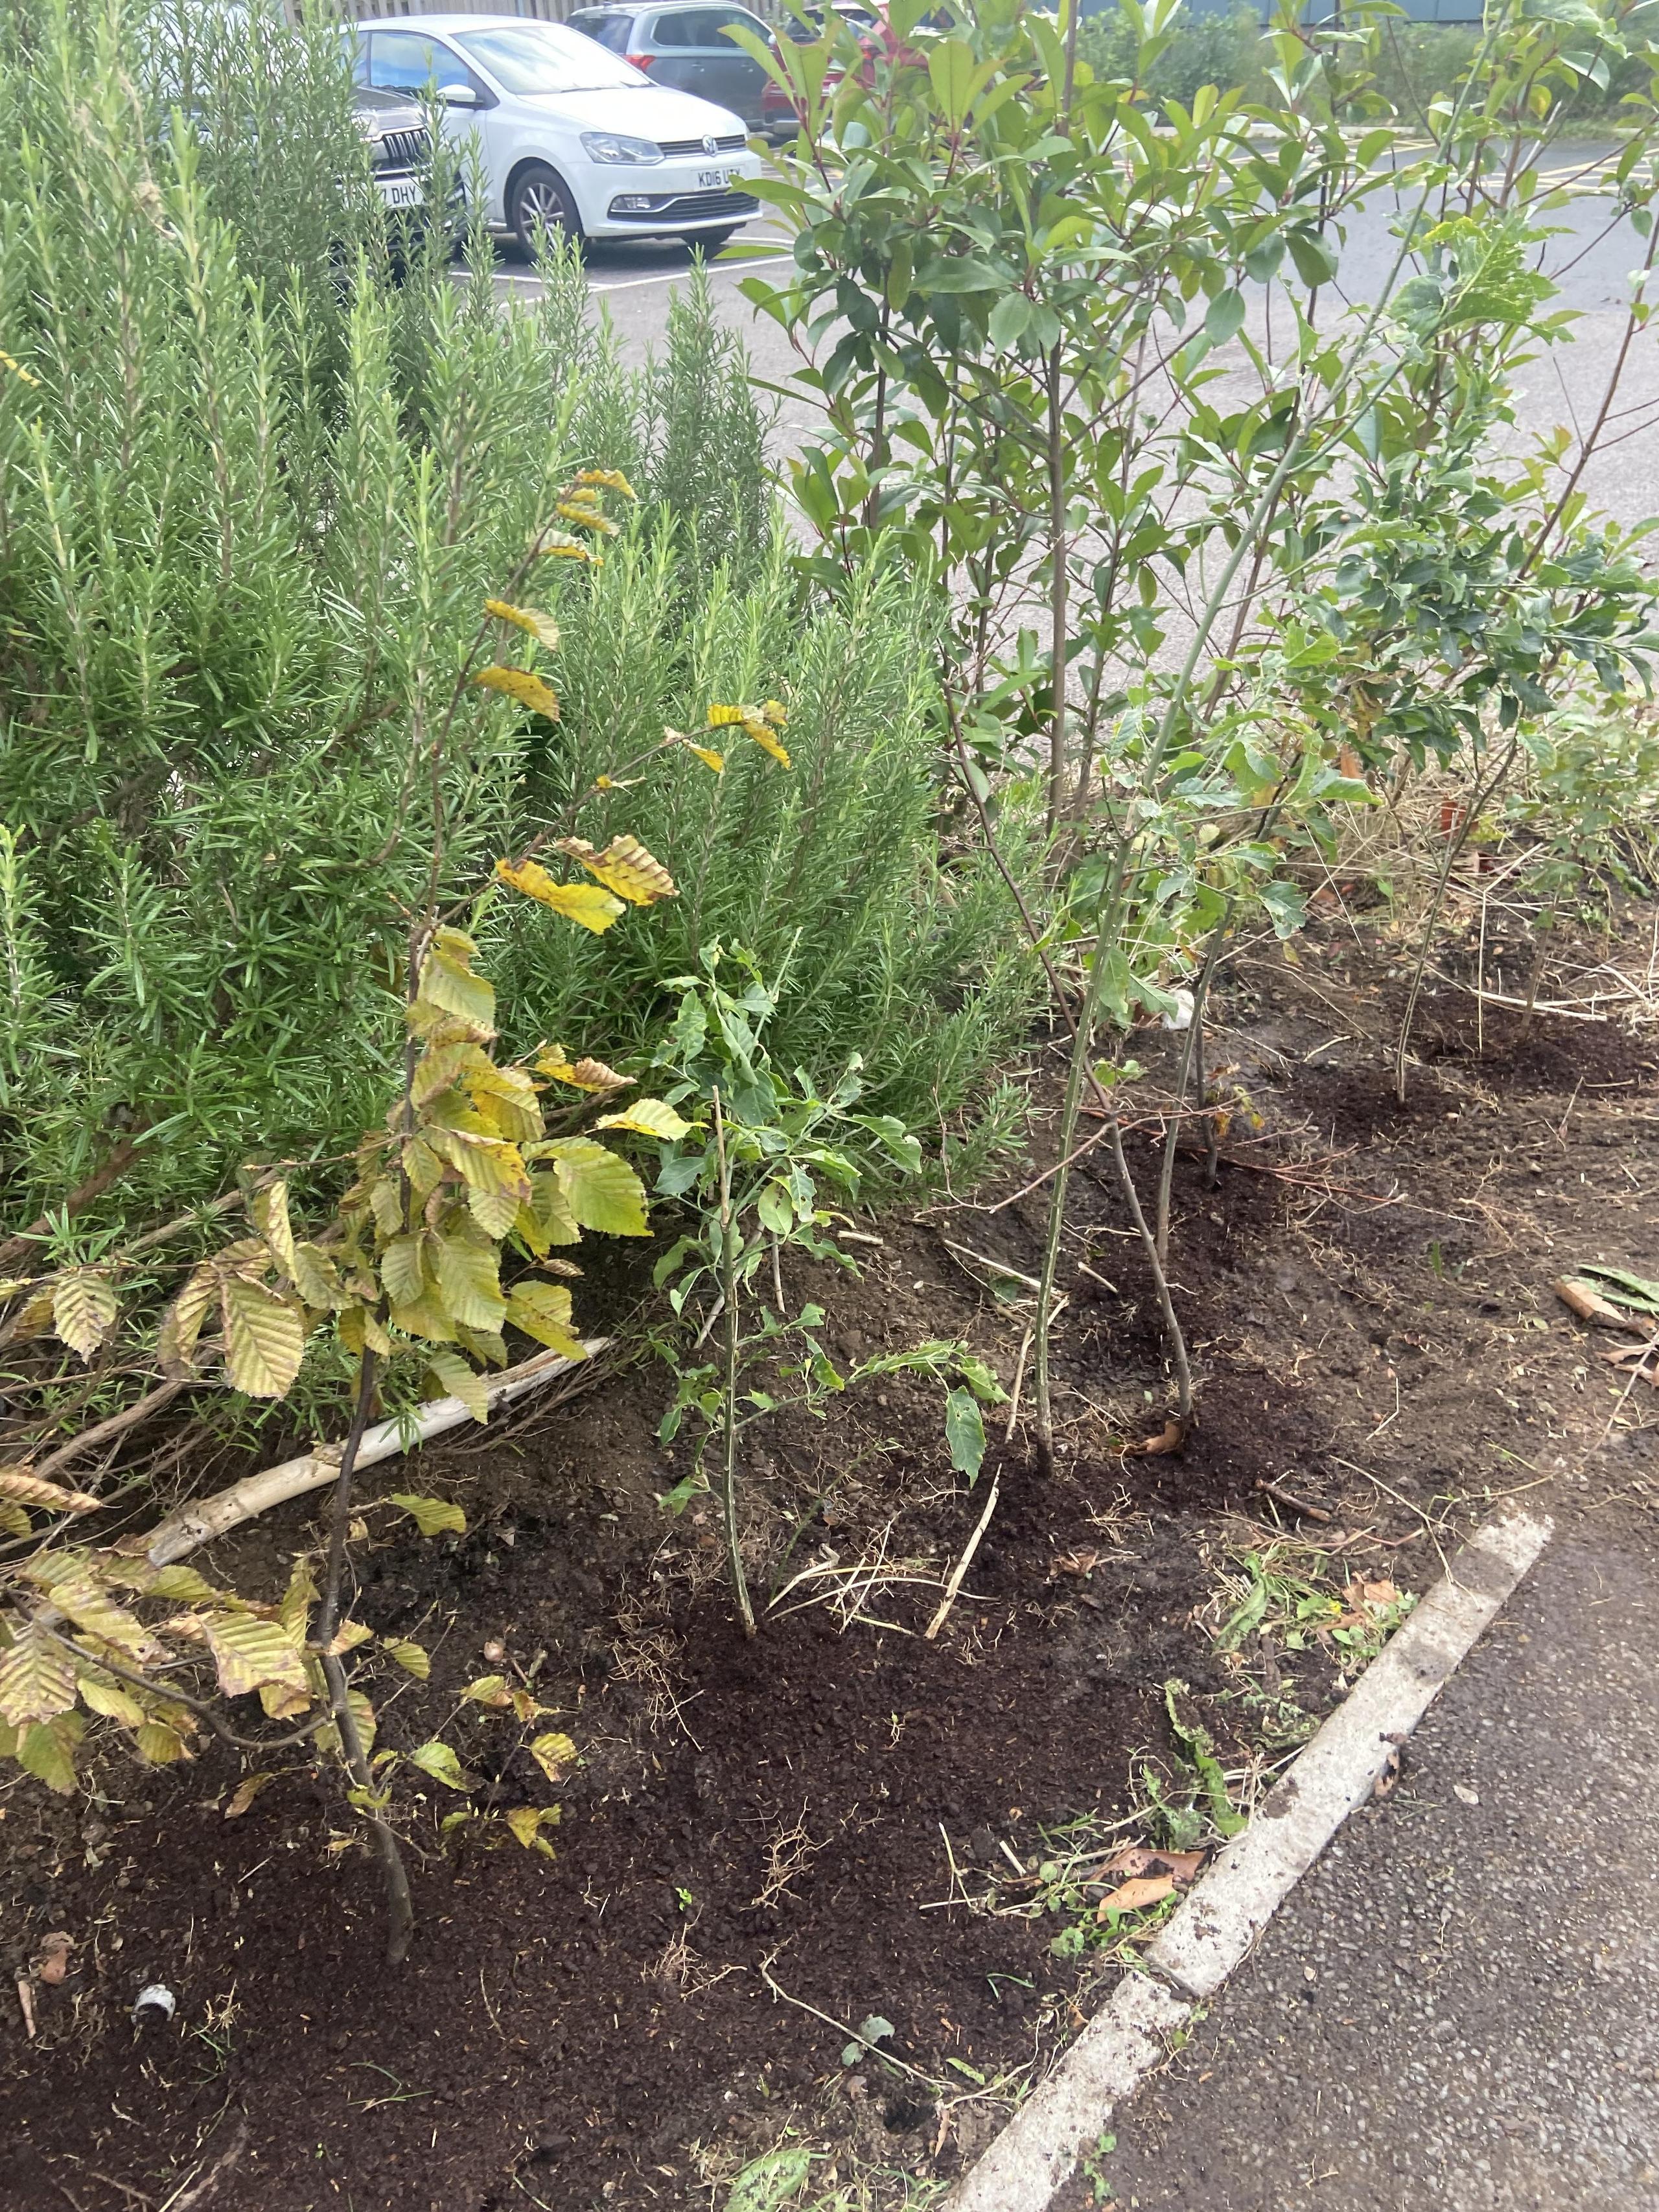 The box plants were infected with box blight and we replaced them with native hedge plants